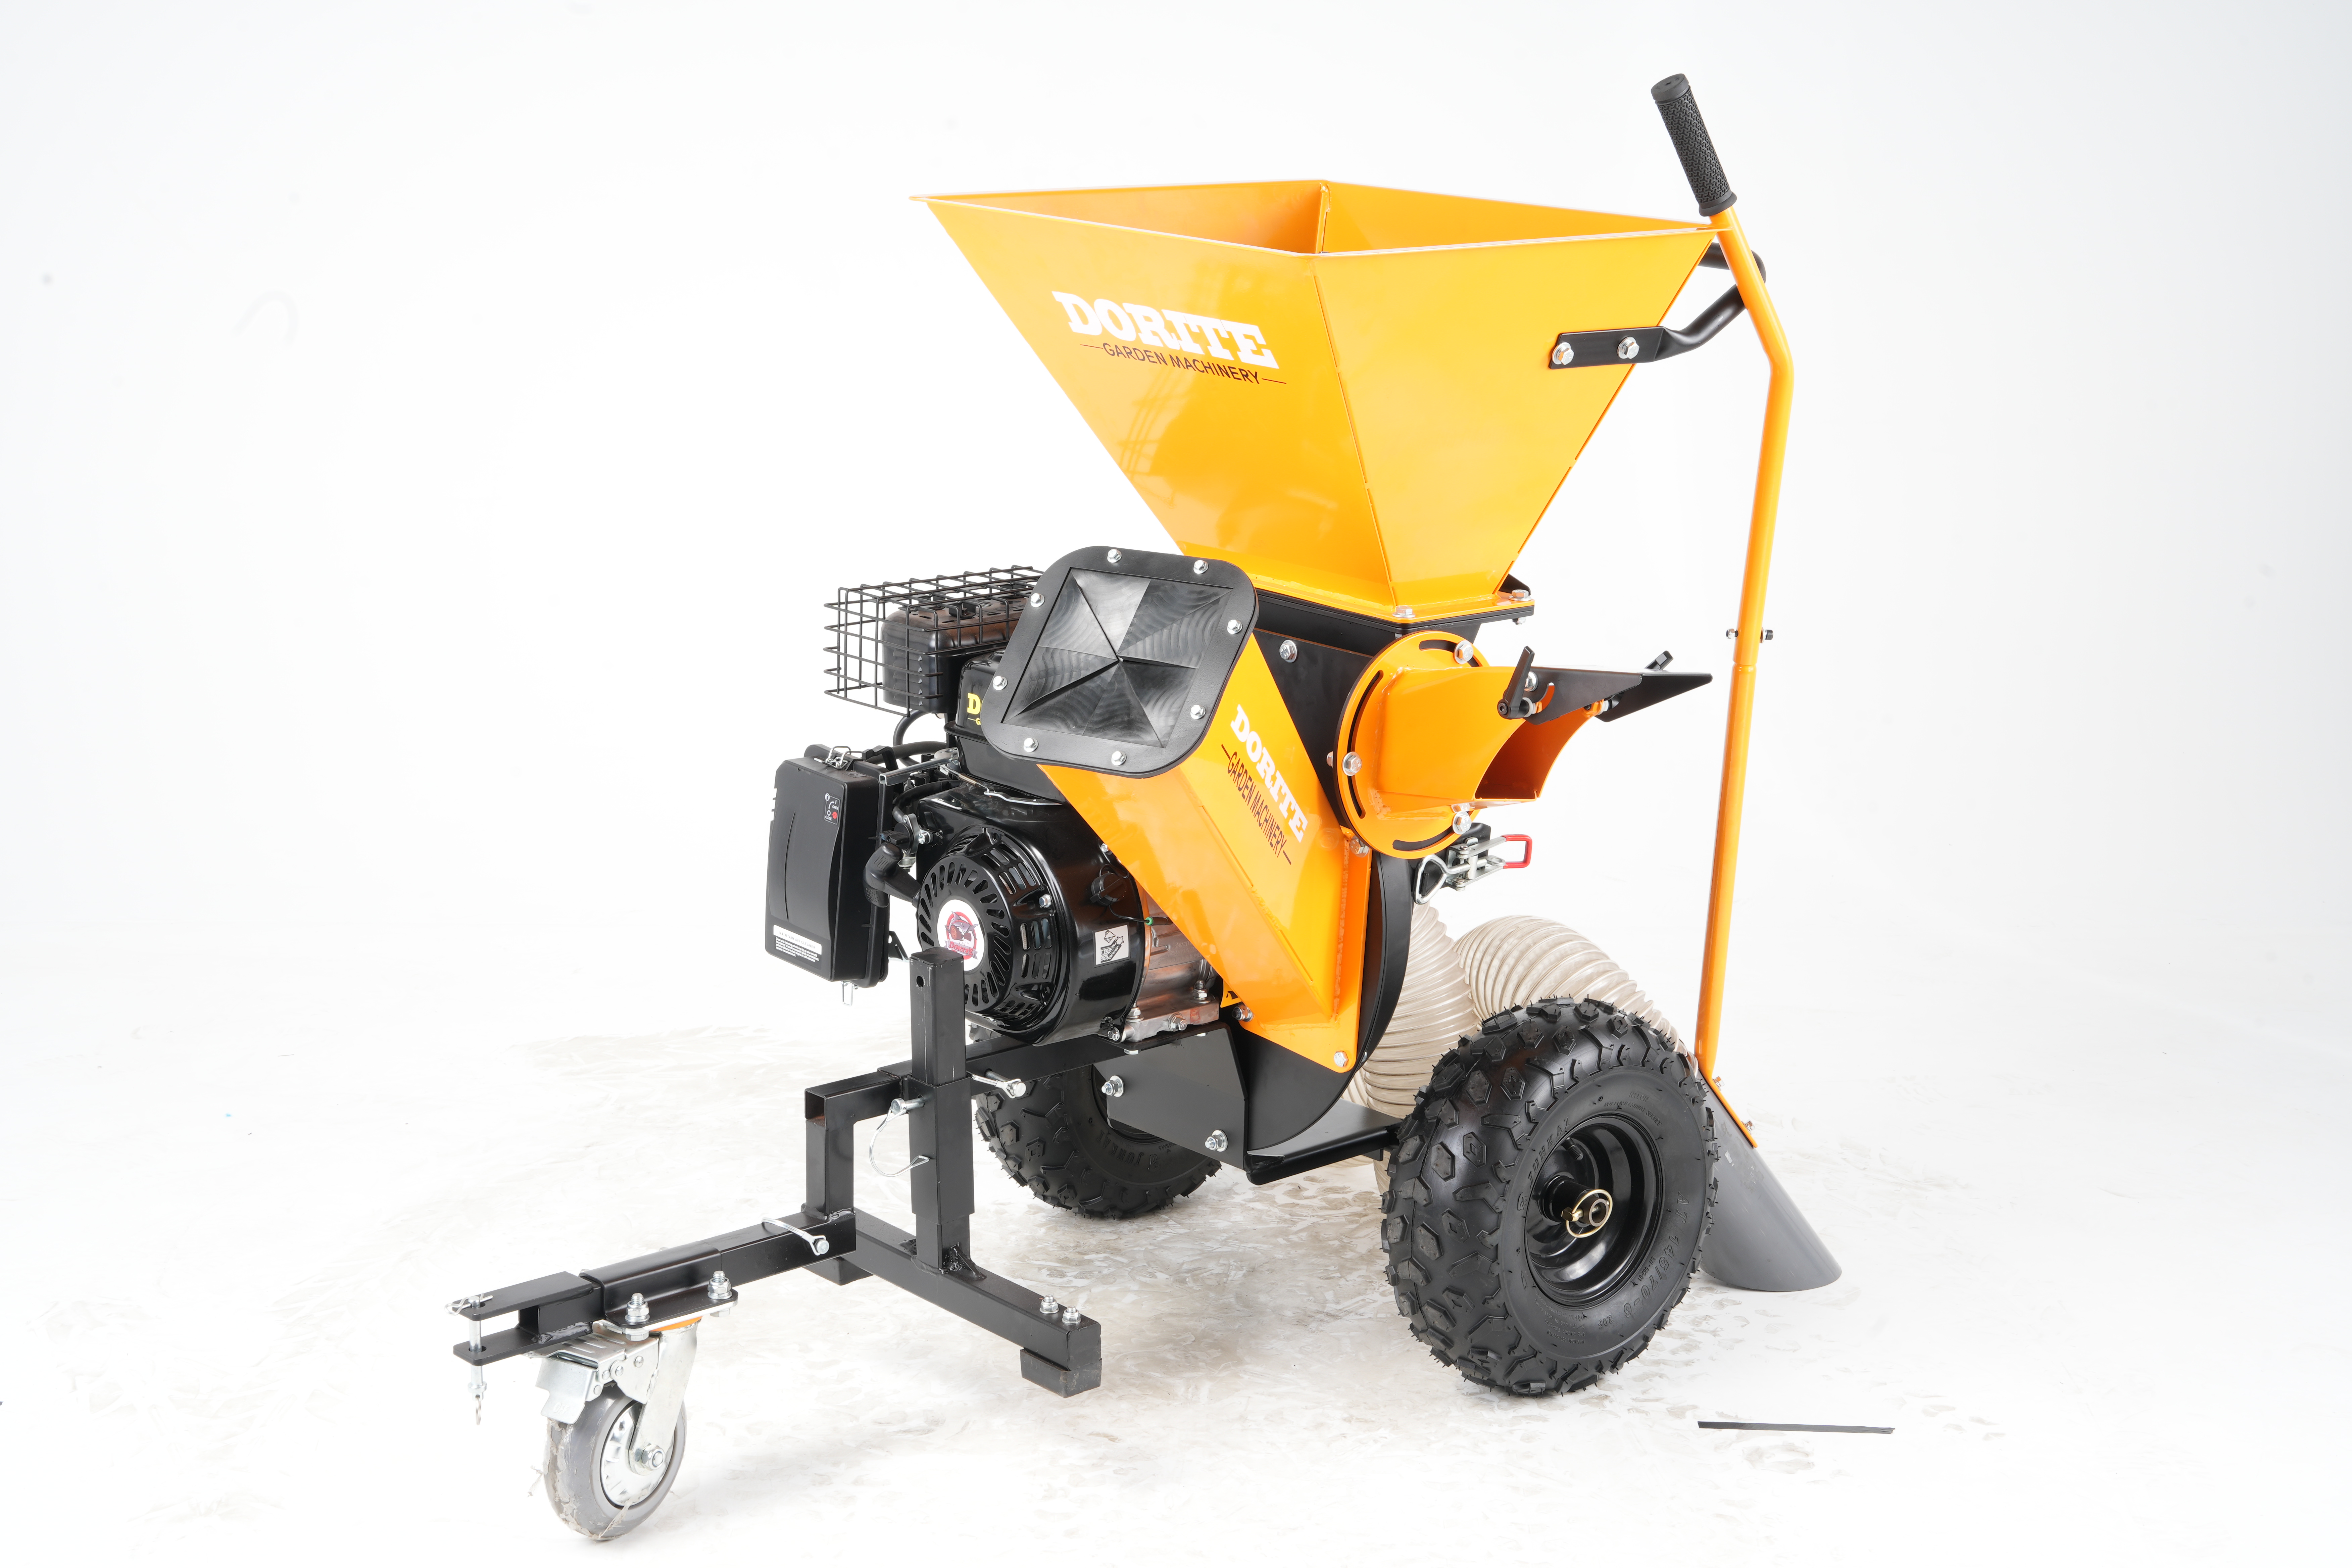 K-MAXPOWER NEW TYPE YELLOW AND BLACK COLOR 533 WOOD CHIPPER